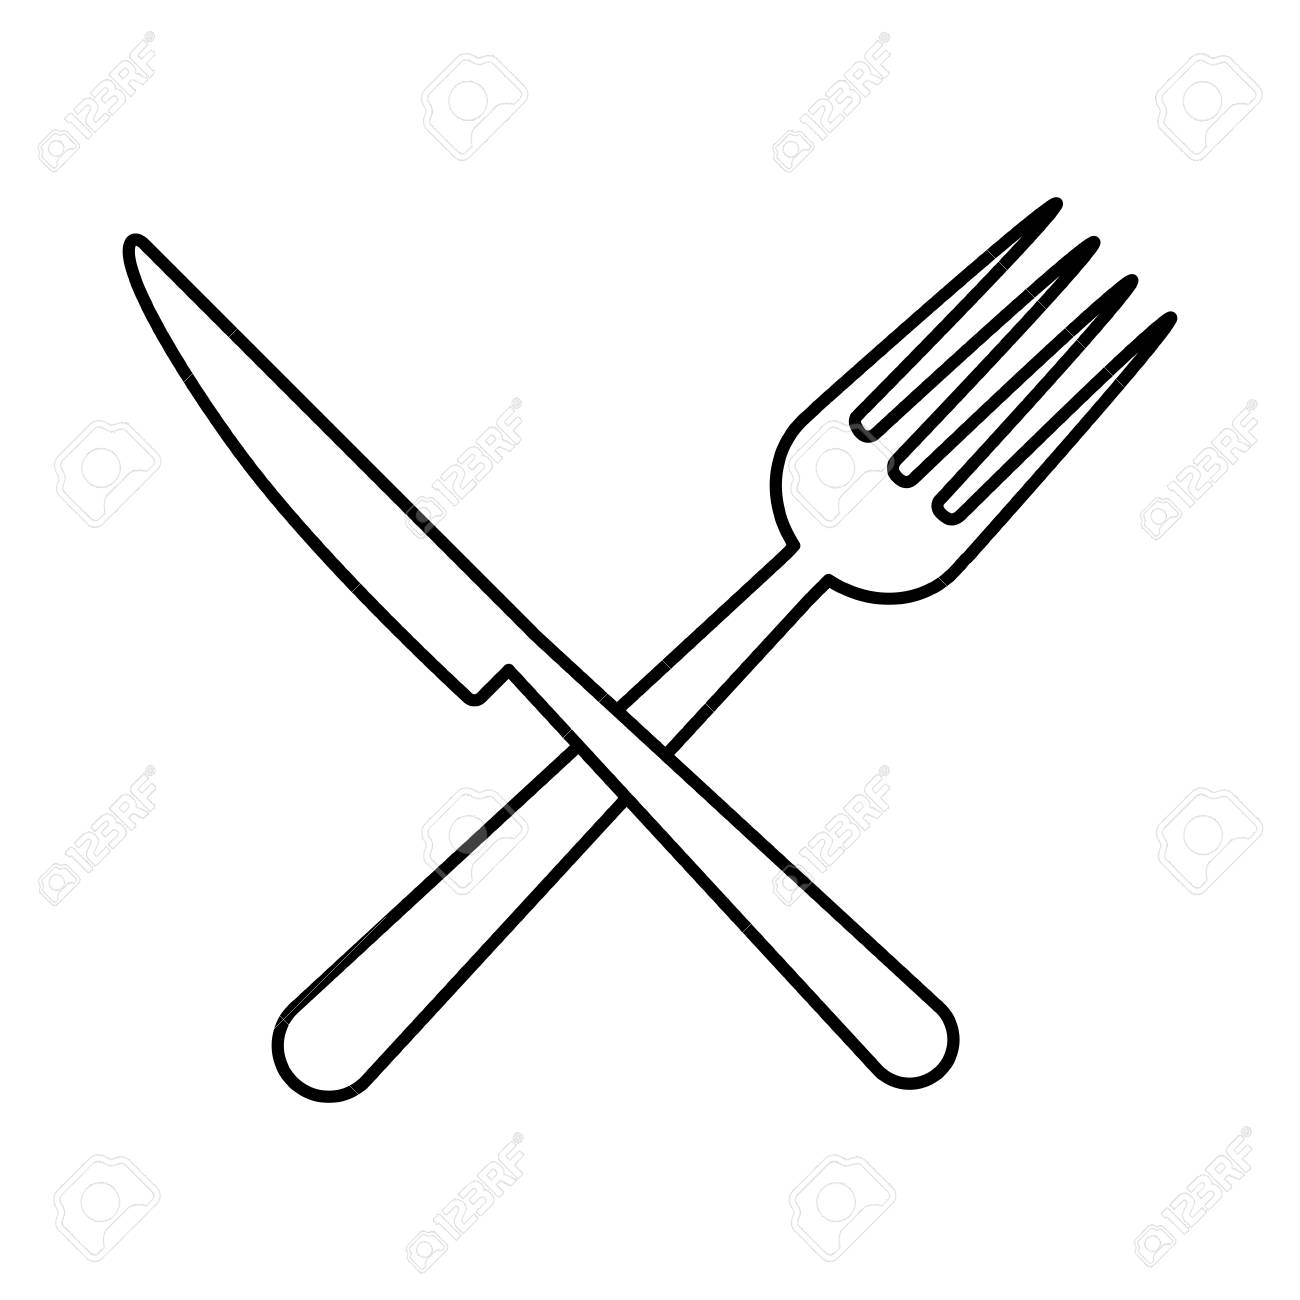 238 Fork And Knife free clipart.